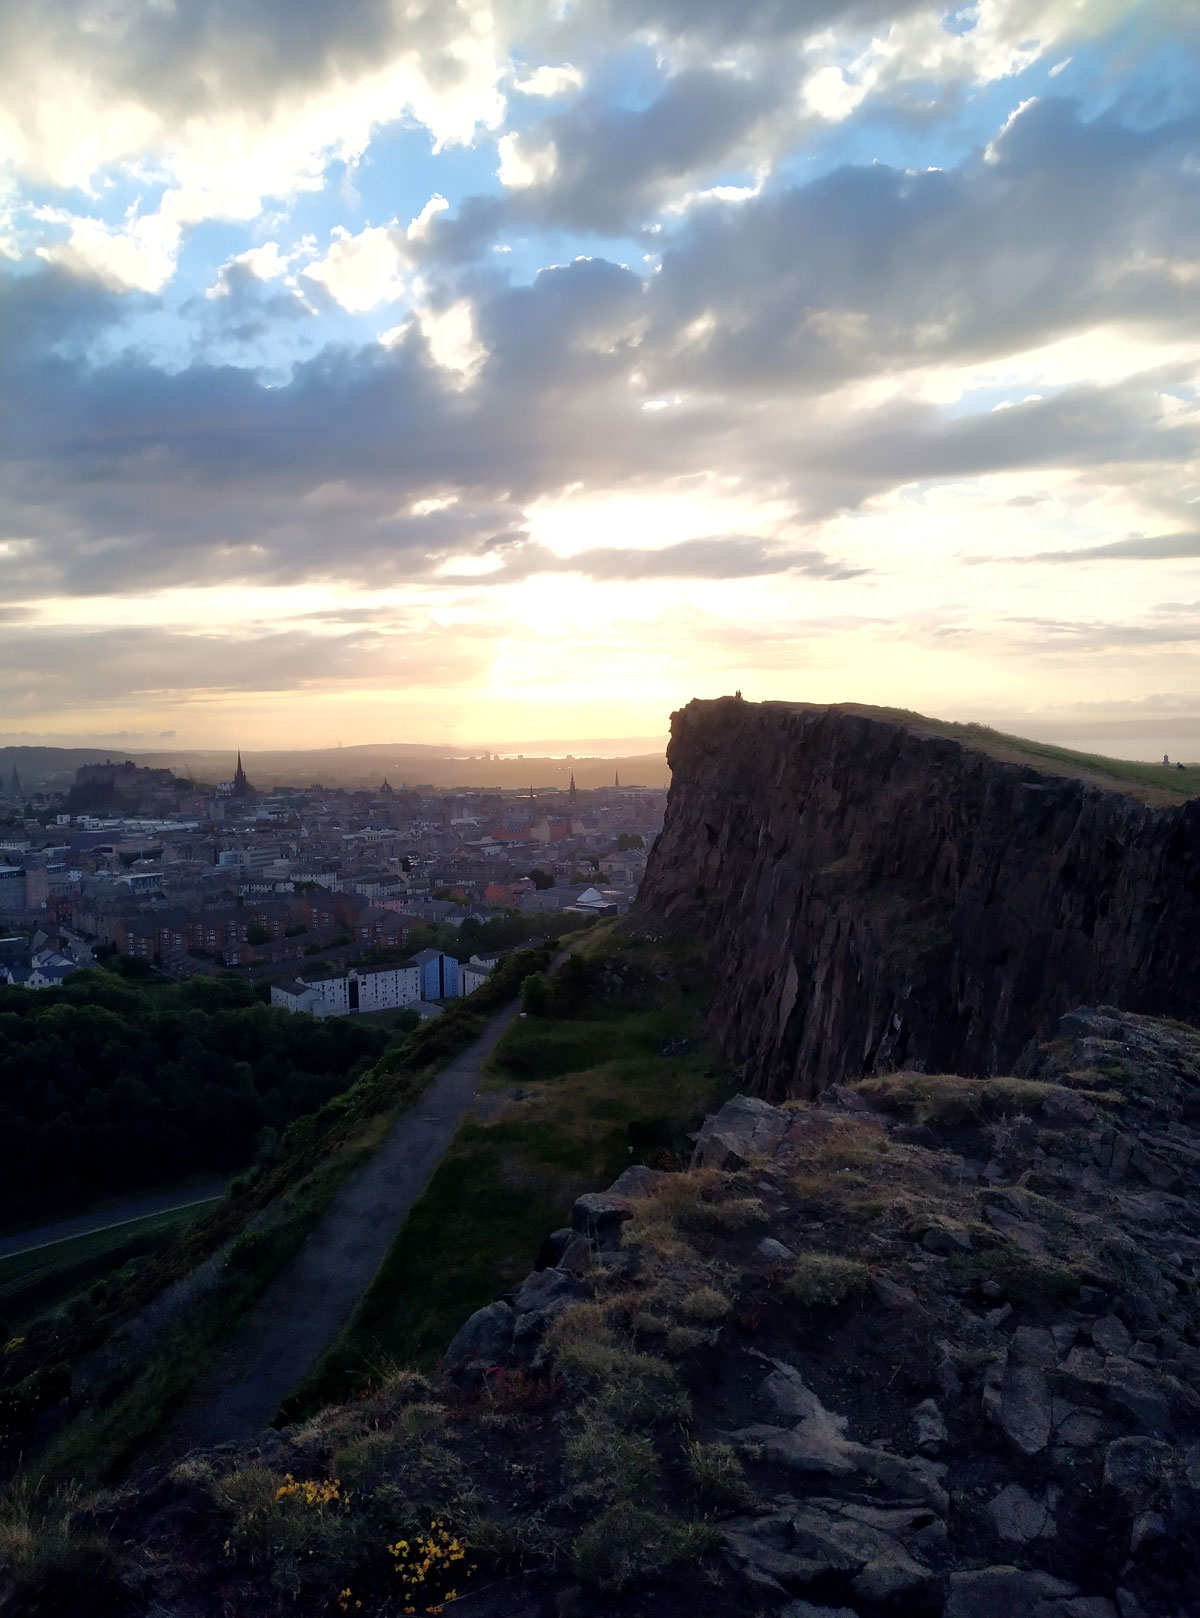 A sunrise with the city of Edinburgh silhoutted and the crags in the forefront